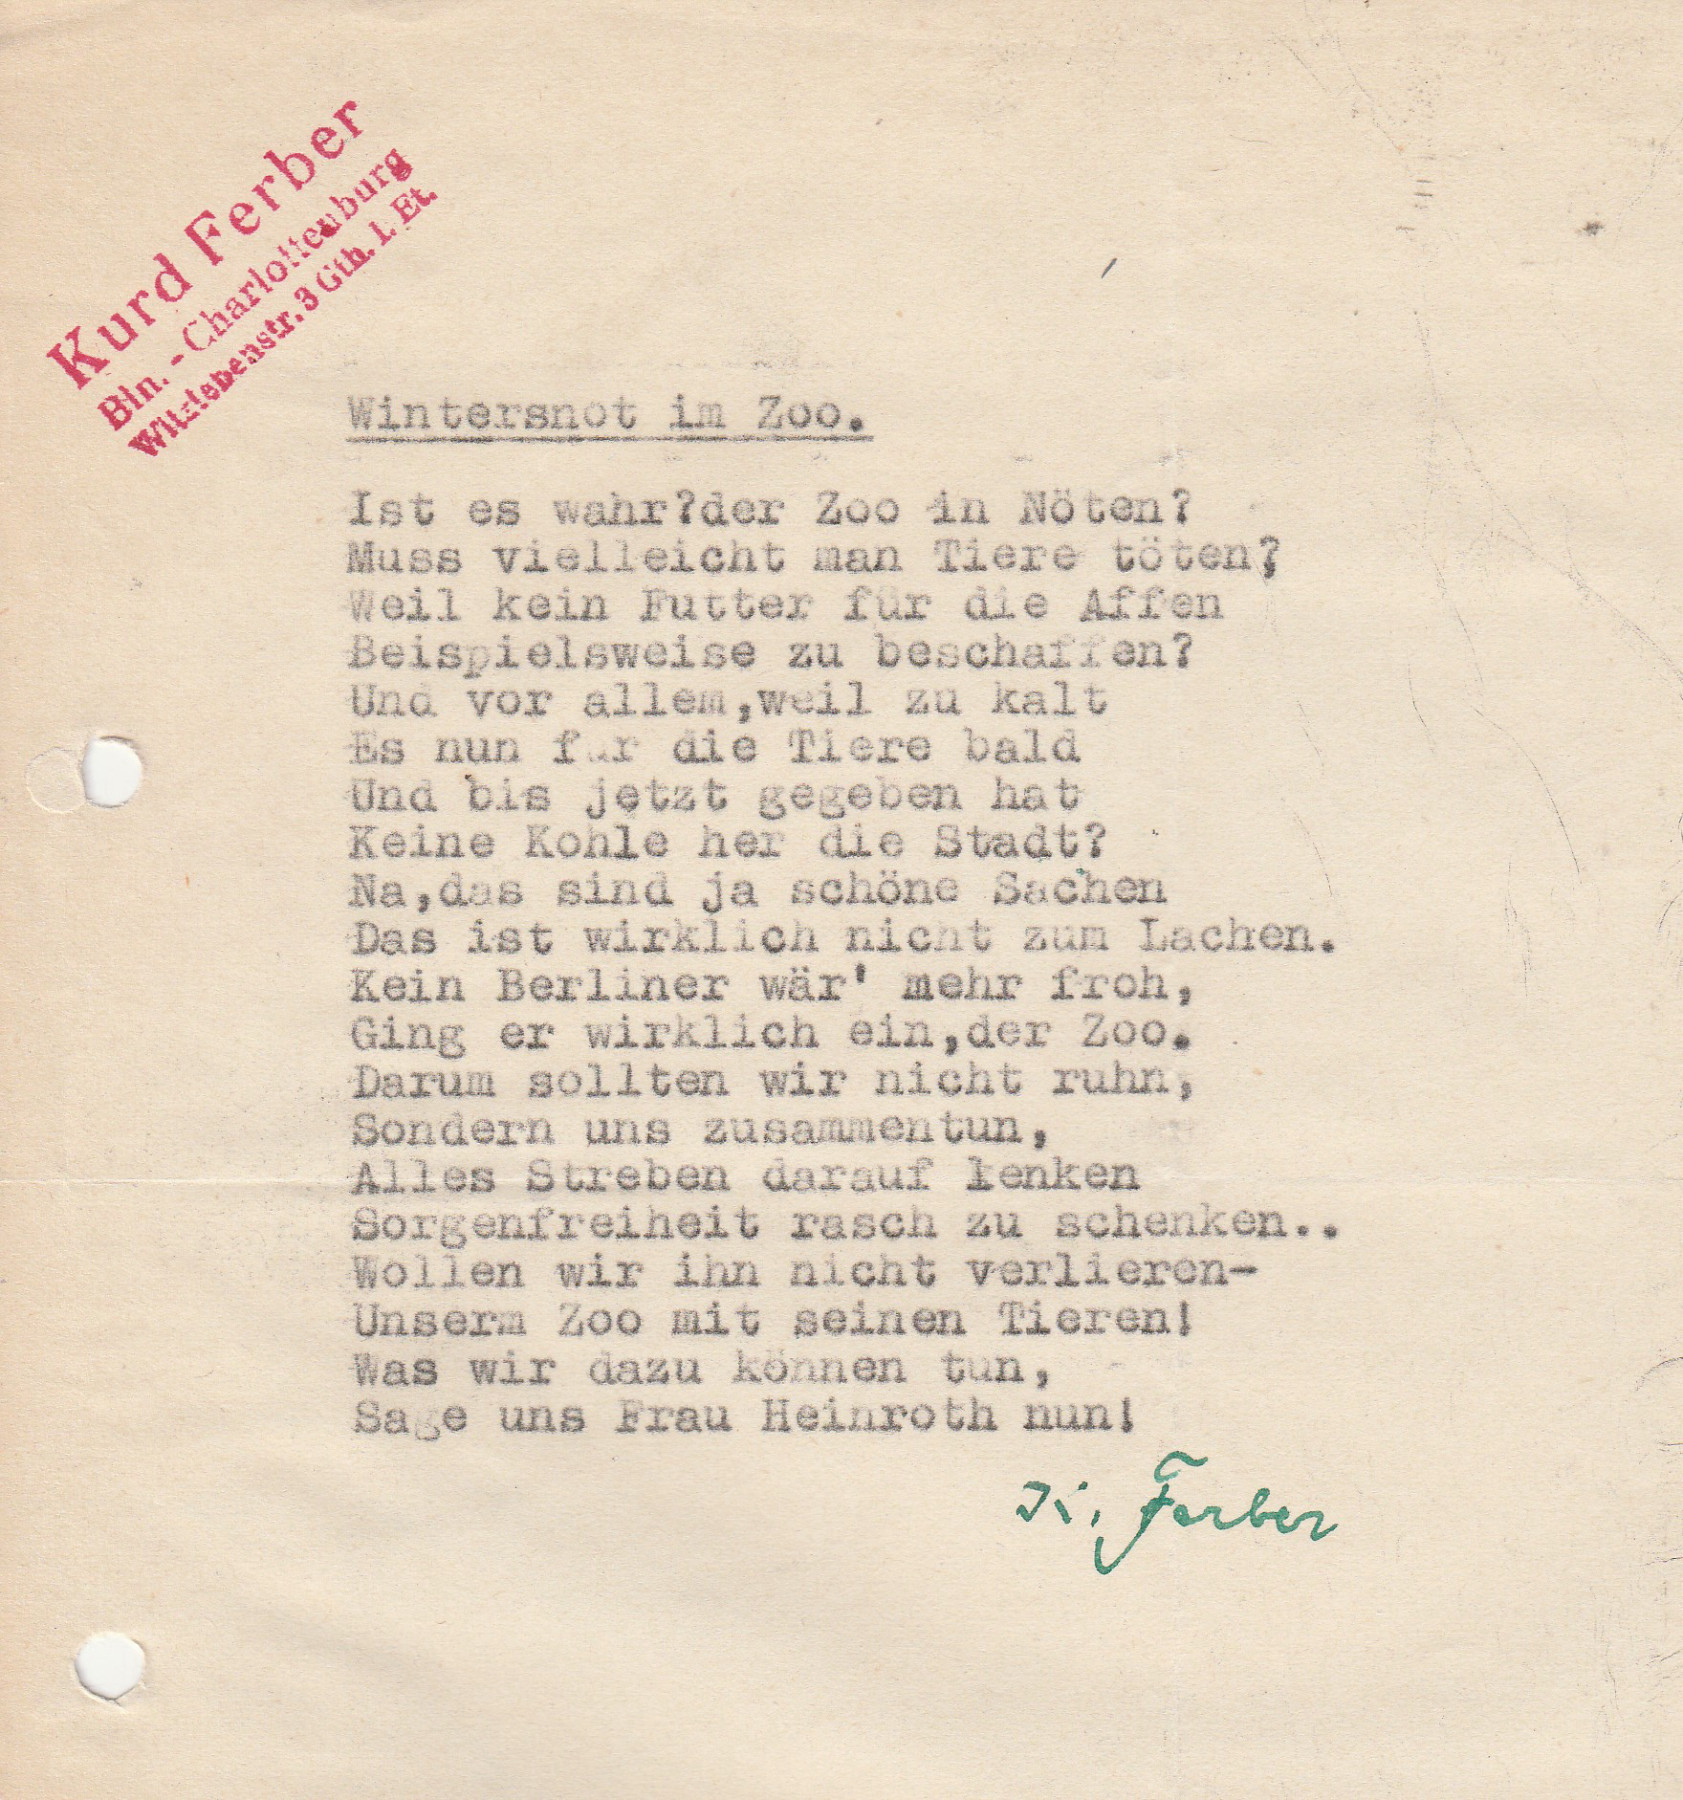 Typewritten poem on a punched sheet of paper with a red stamp with the name "Kurd Ferber" and a signature in green ink "K.Ferber". For transcript, see link in caption.